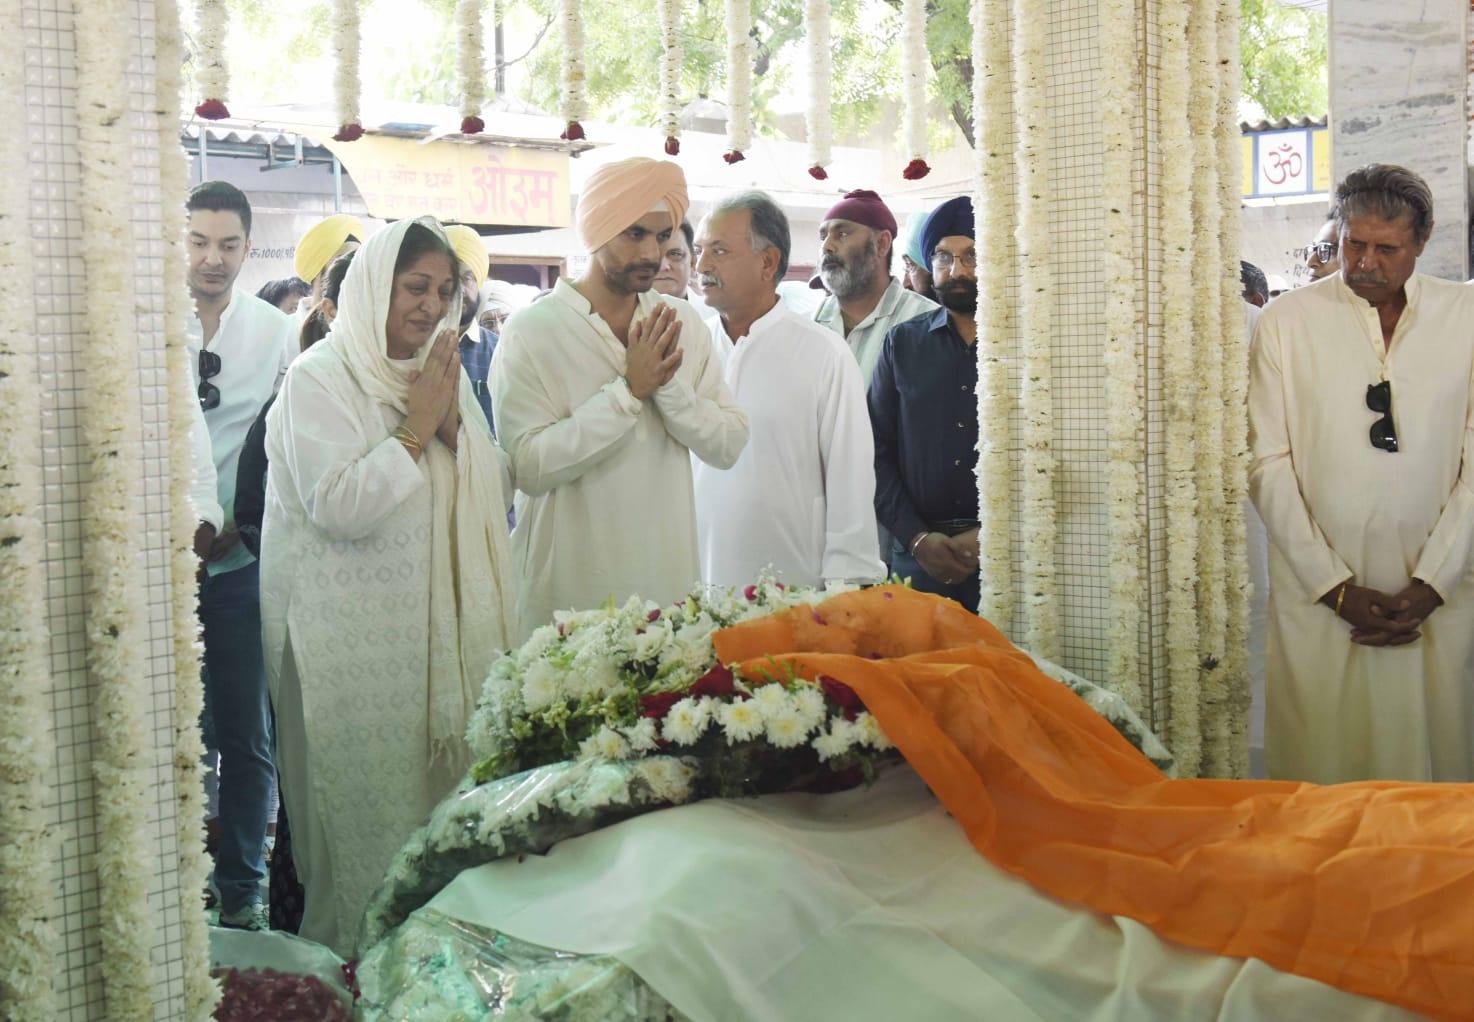 Former cricketer Kapil Dev was also present during the last rituals